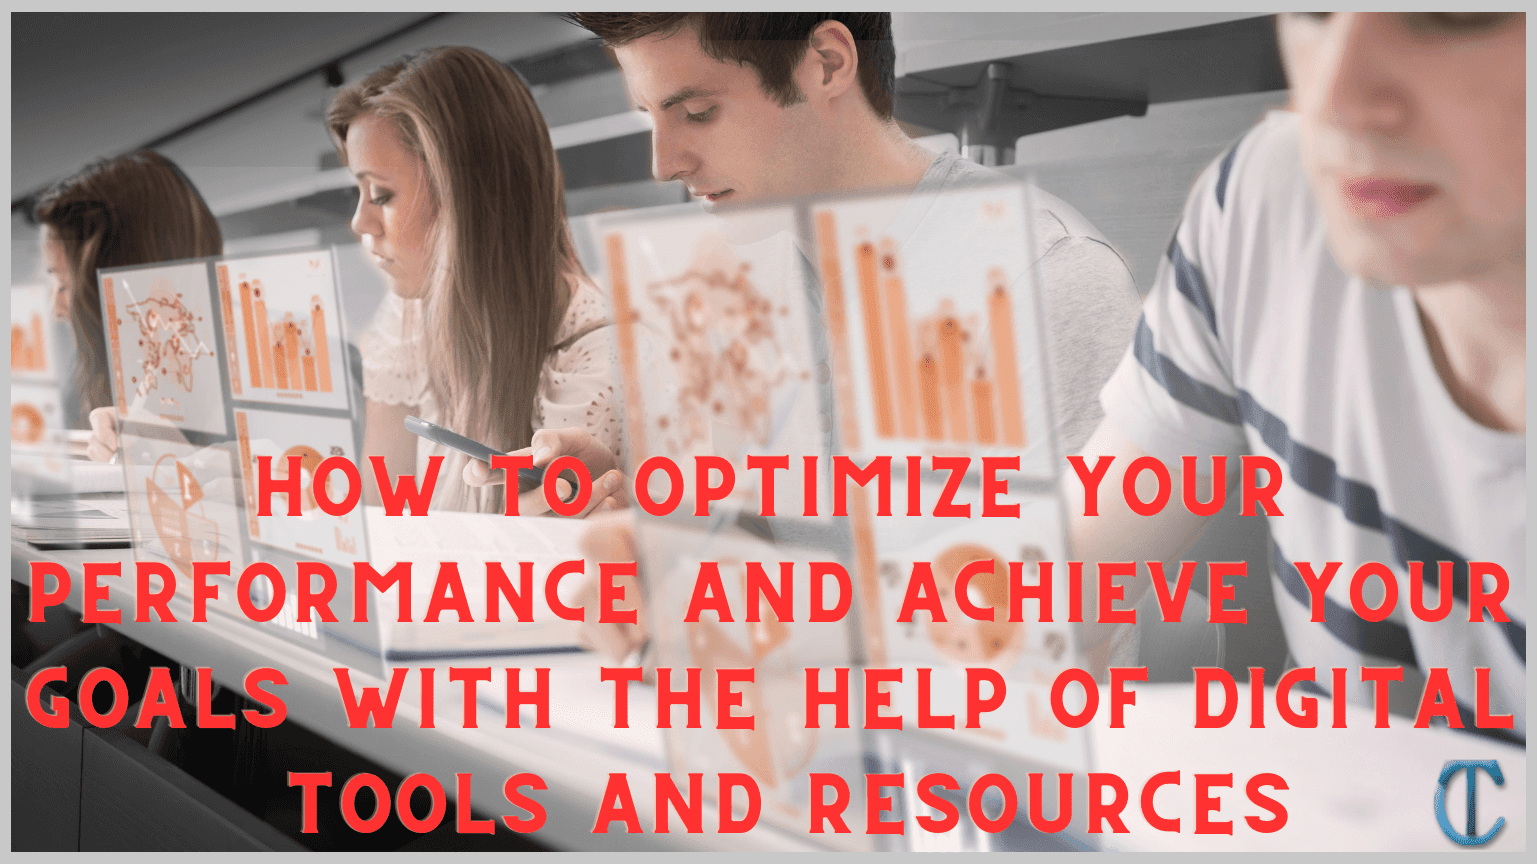  How to Optimize Your Performance and Achieve Your Goals With the Help of Digital Tools and Resources